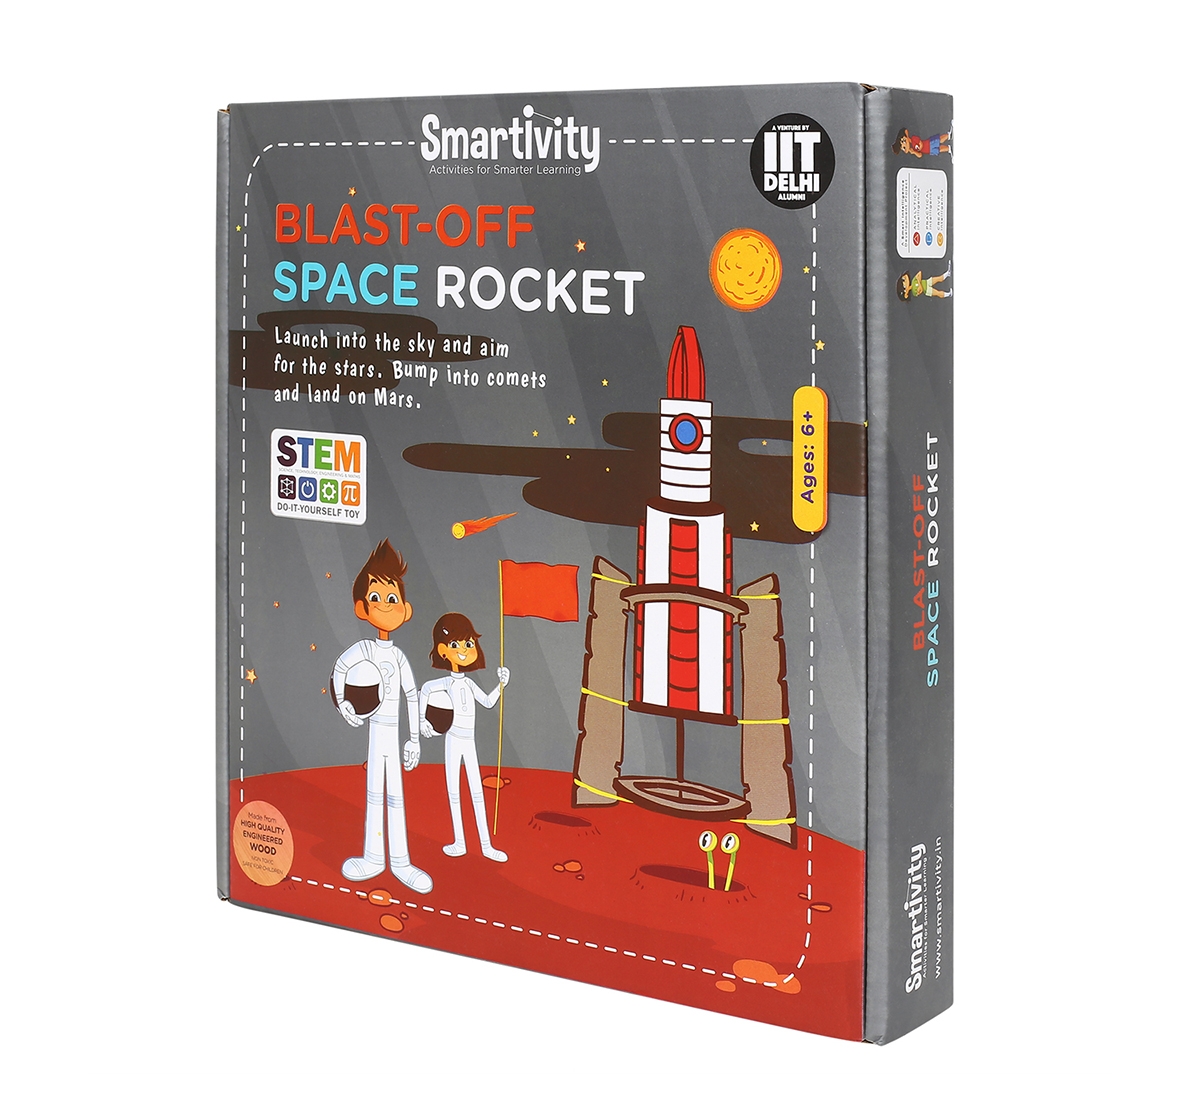 Smartivity | Smartivity Space Rocket Blast-off Action STEM Toy, Educational & Construction based DIY Fun Activity Game for Kids 6 to 14, Gifts for Boys & Girls, Learn Science Engineering Project, Made in India 1